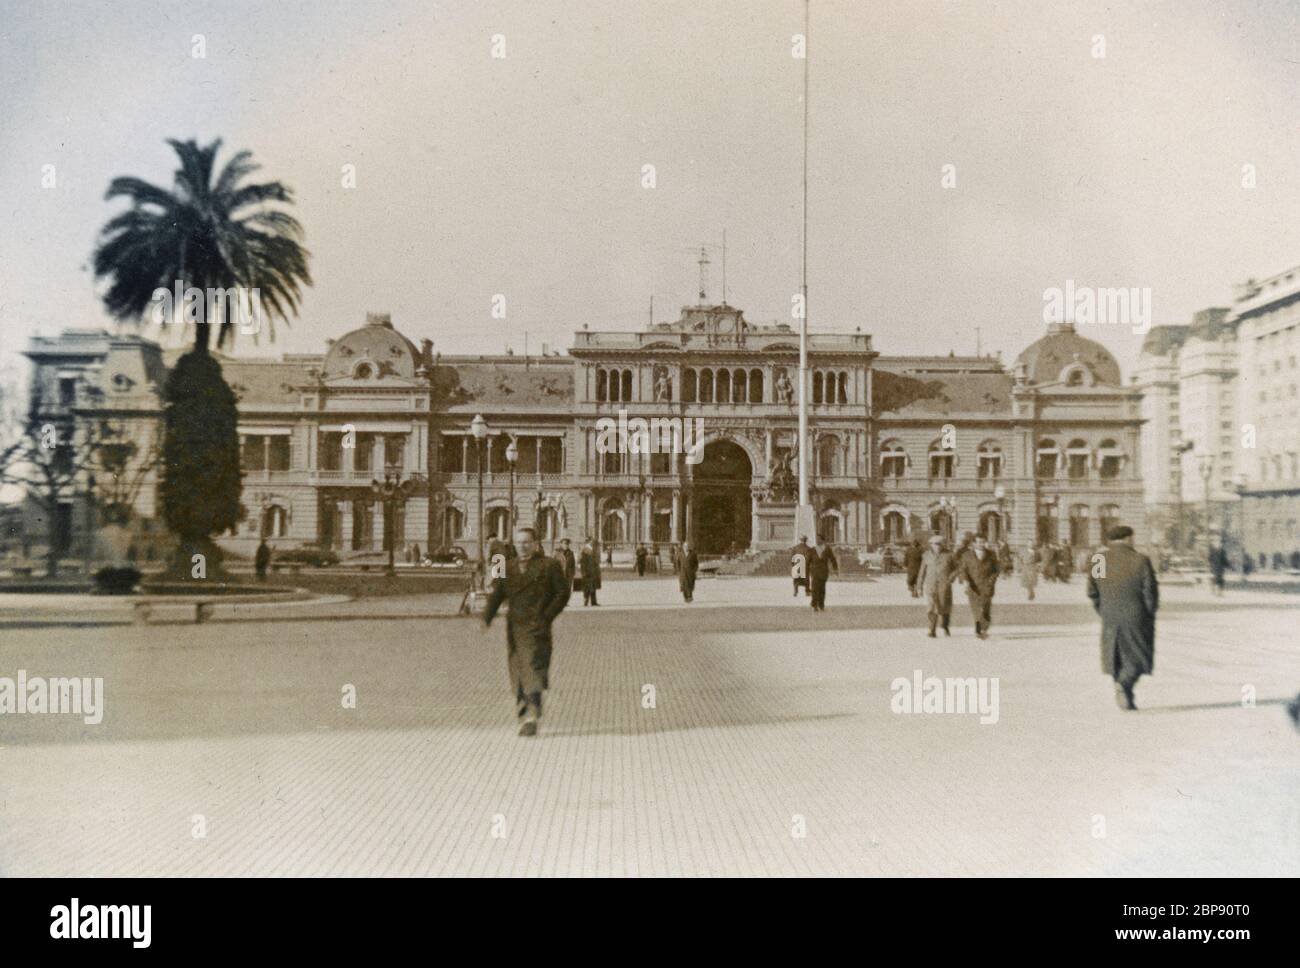 Vintage photograph, Casa Rosada in Buenos Aires, Agentina on July 6–8, 1955. The Casa Rosada is the executive mansion and office of the President of Argentina. Taken by a passenger debarked from a cruise ship. SOURCE: ORIGINAL PHOTOGRAPH Stock Photo